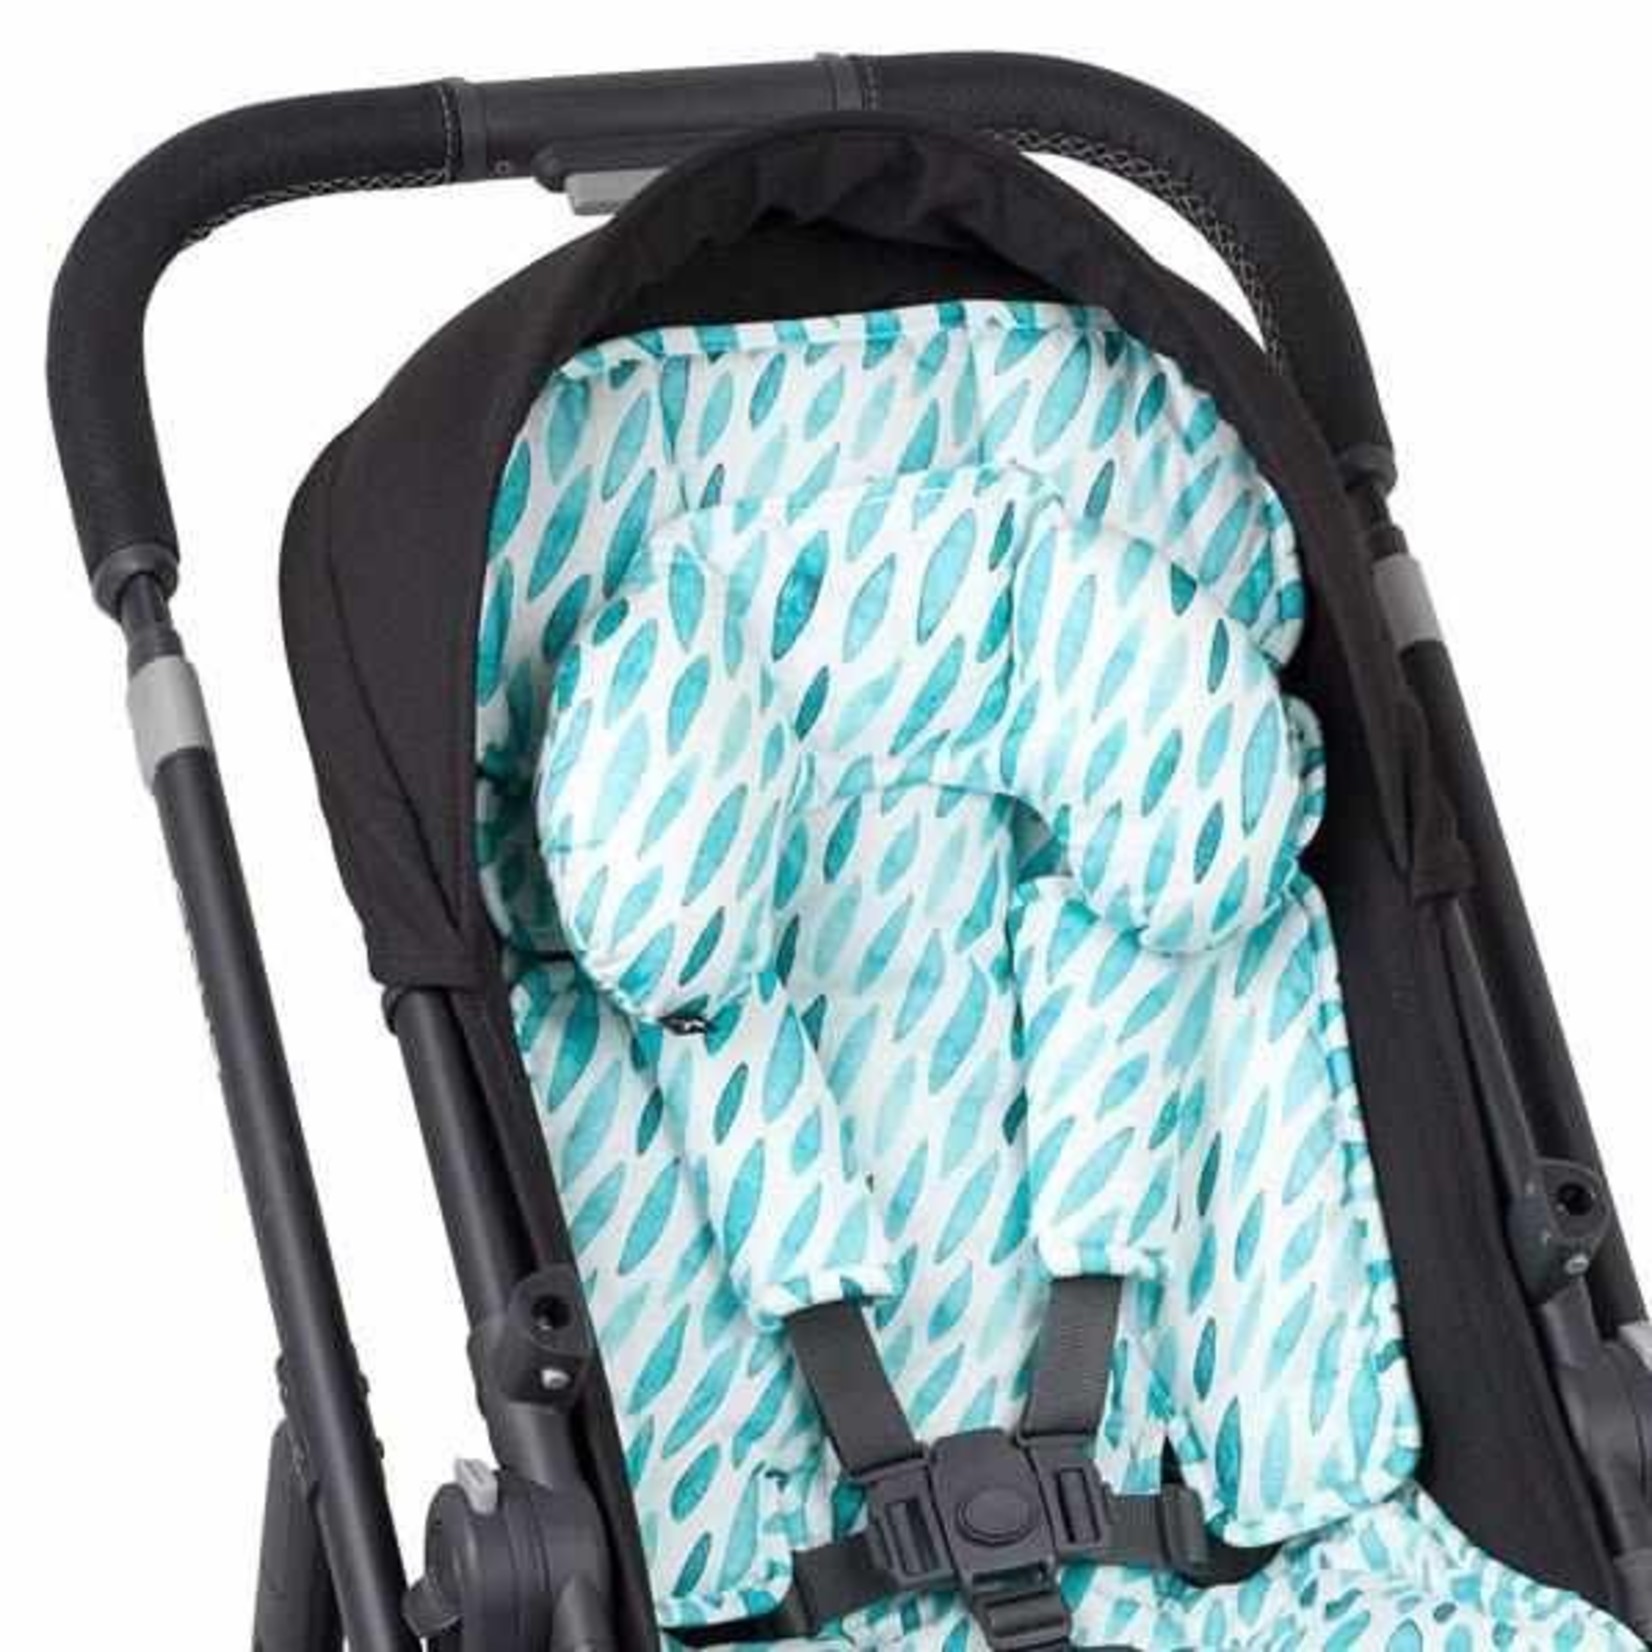 Outlookbaby 3 Piece Harness Cover Set - Teal Drops